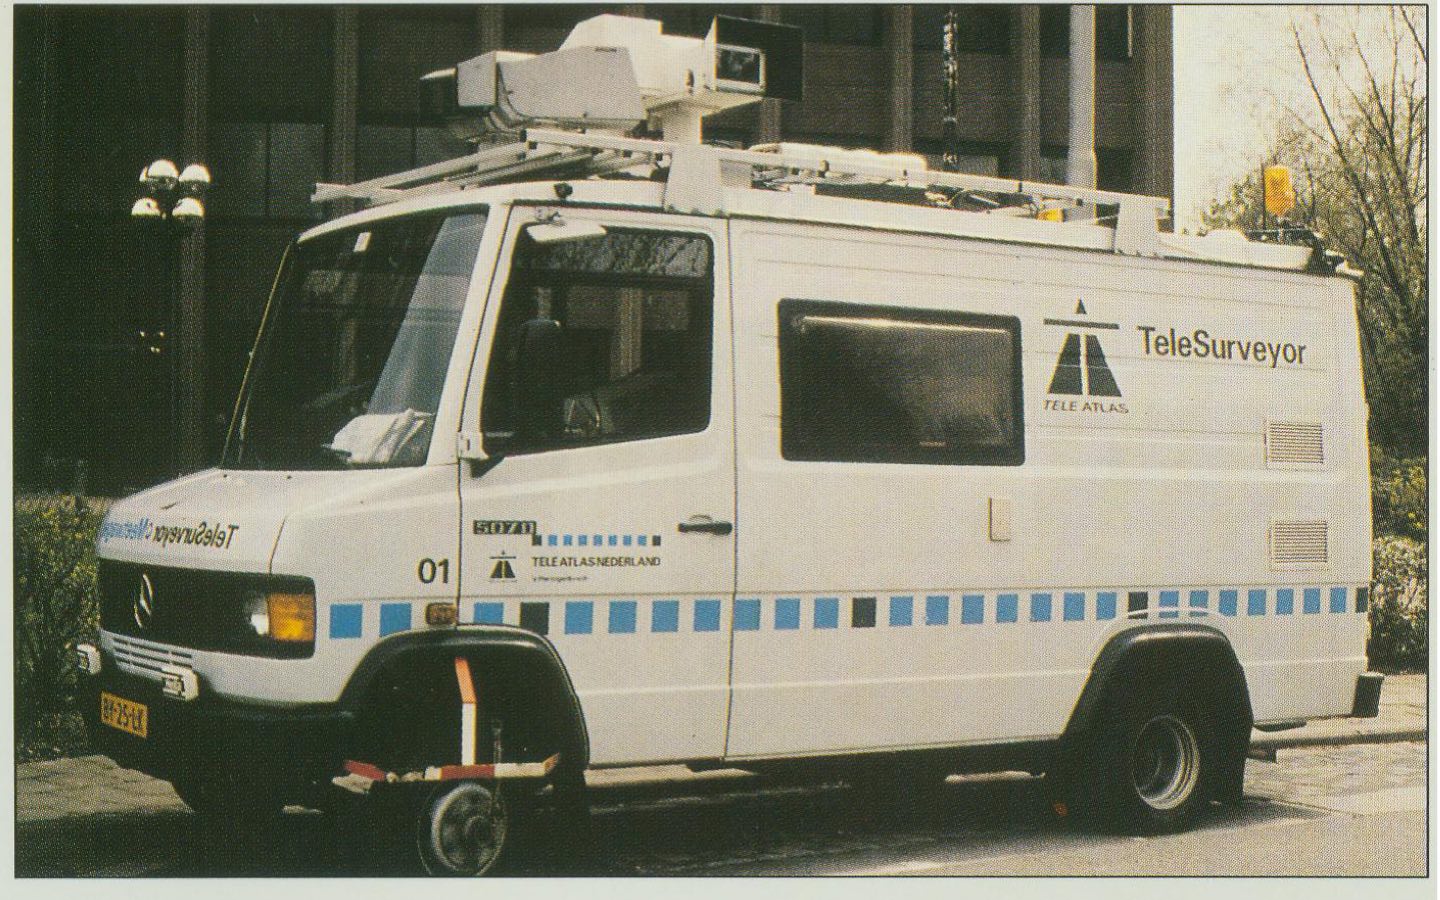 The Tele Atlas TeleSurveyor. The first mobile surveying vehicle was developed in the 1980s. Tele Atlas is also now part of TomTom, bringing its experience and tech to the company.